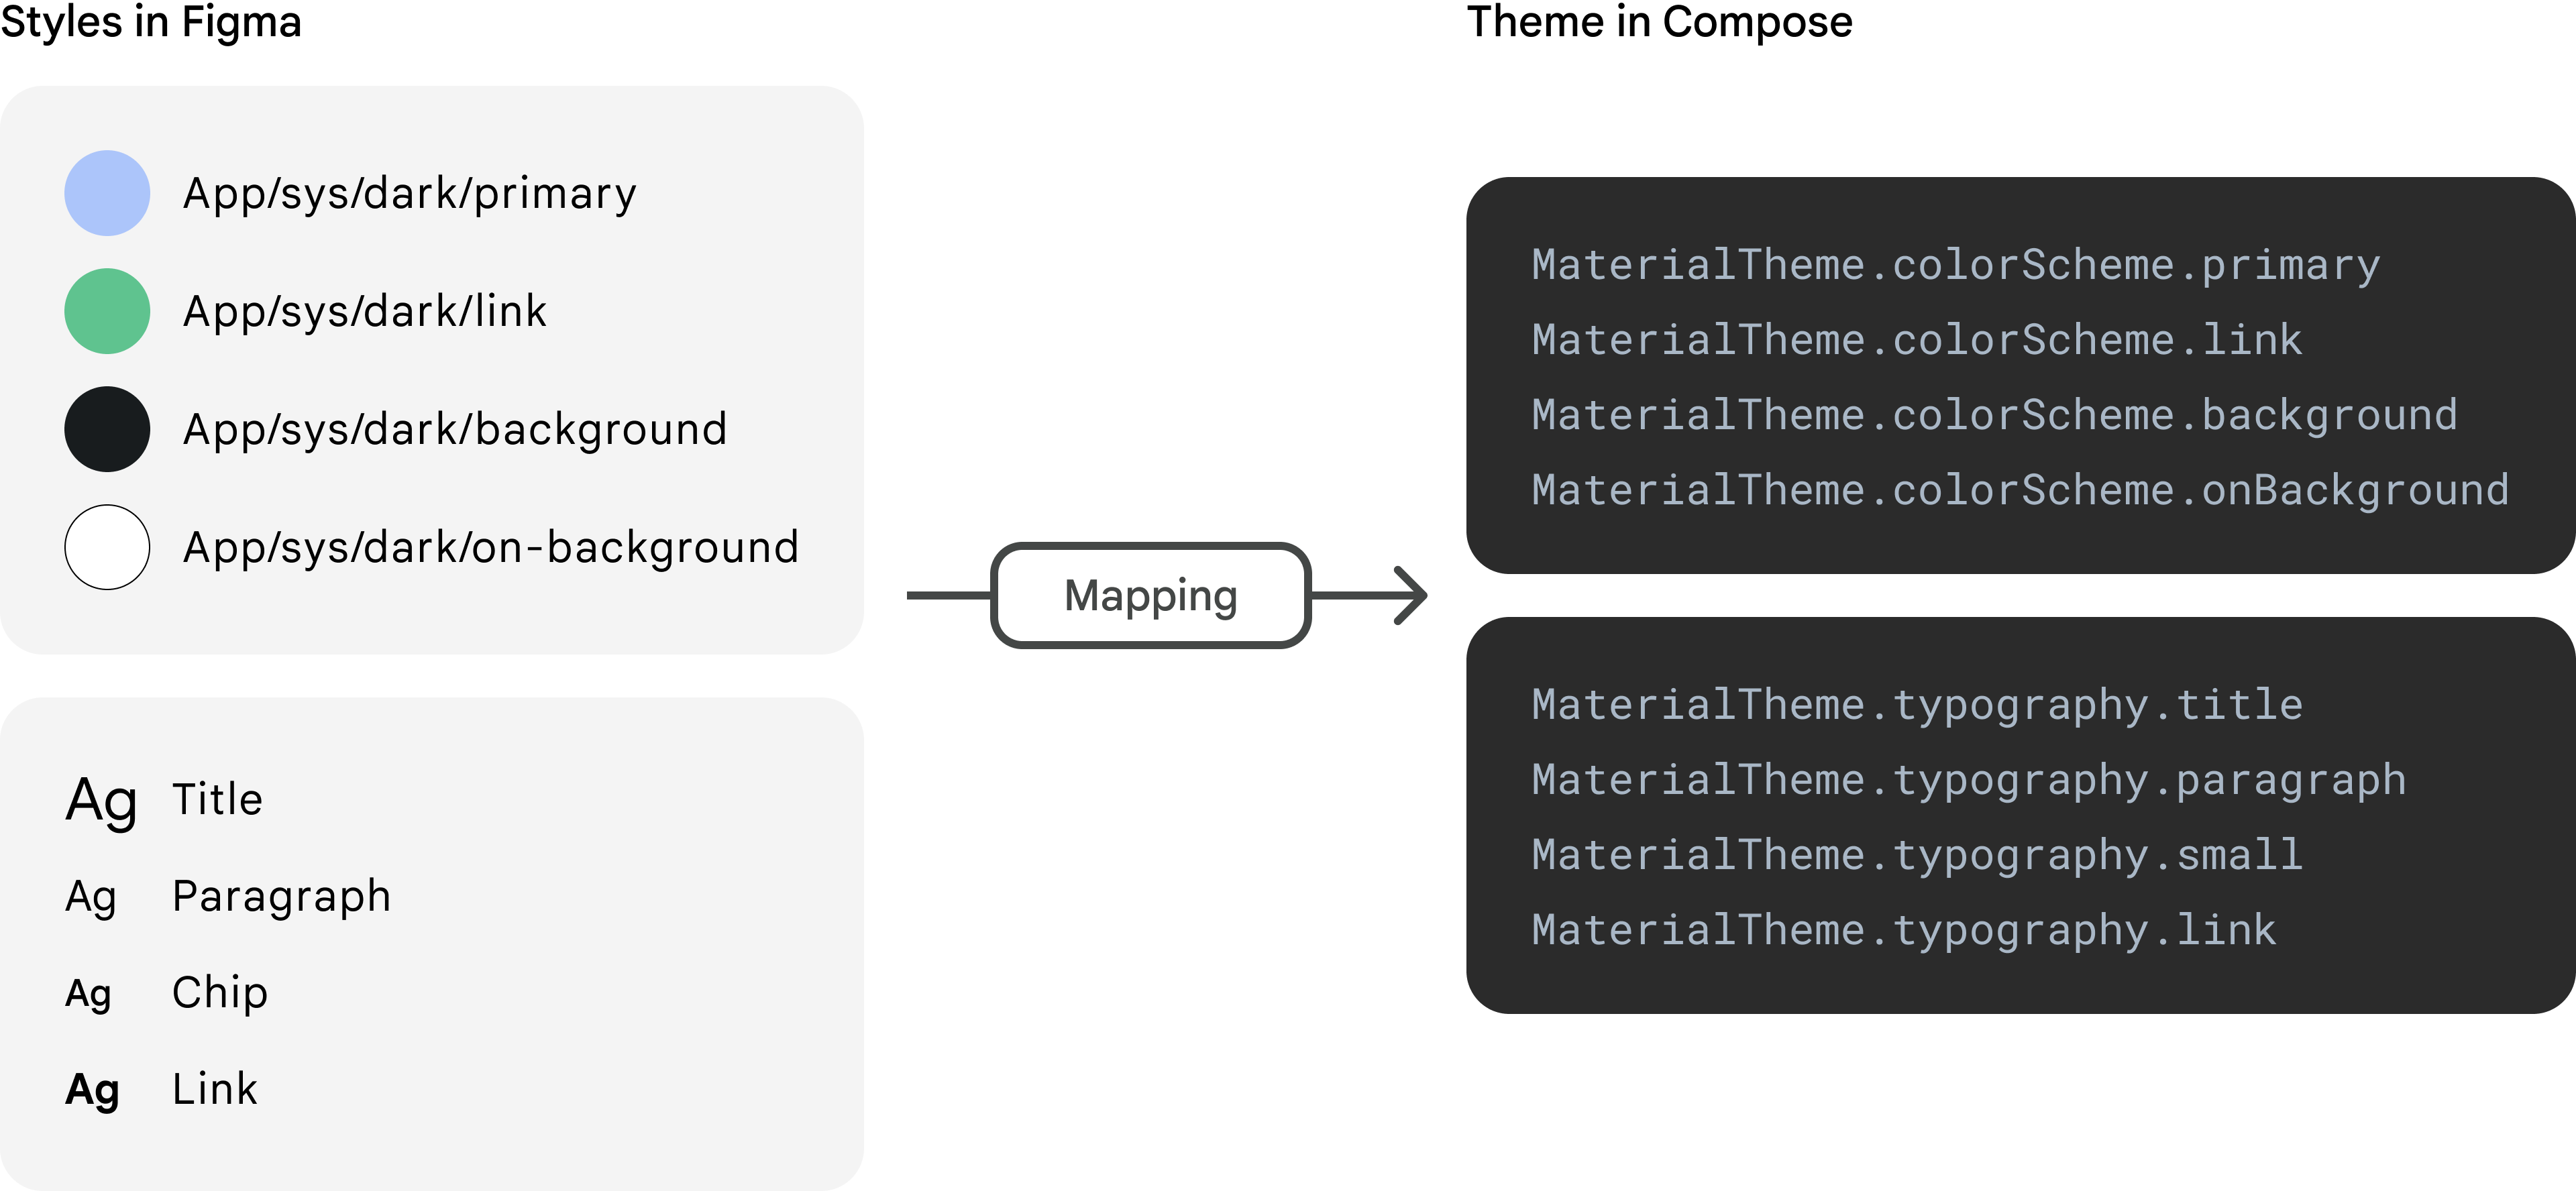 Mapping from Styles in Figma to Theme in Compose